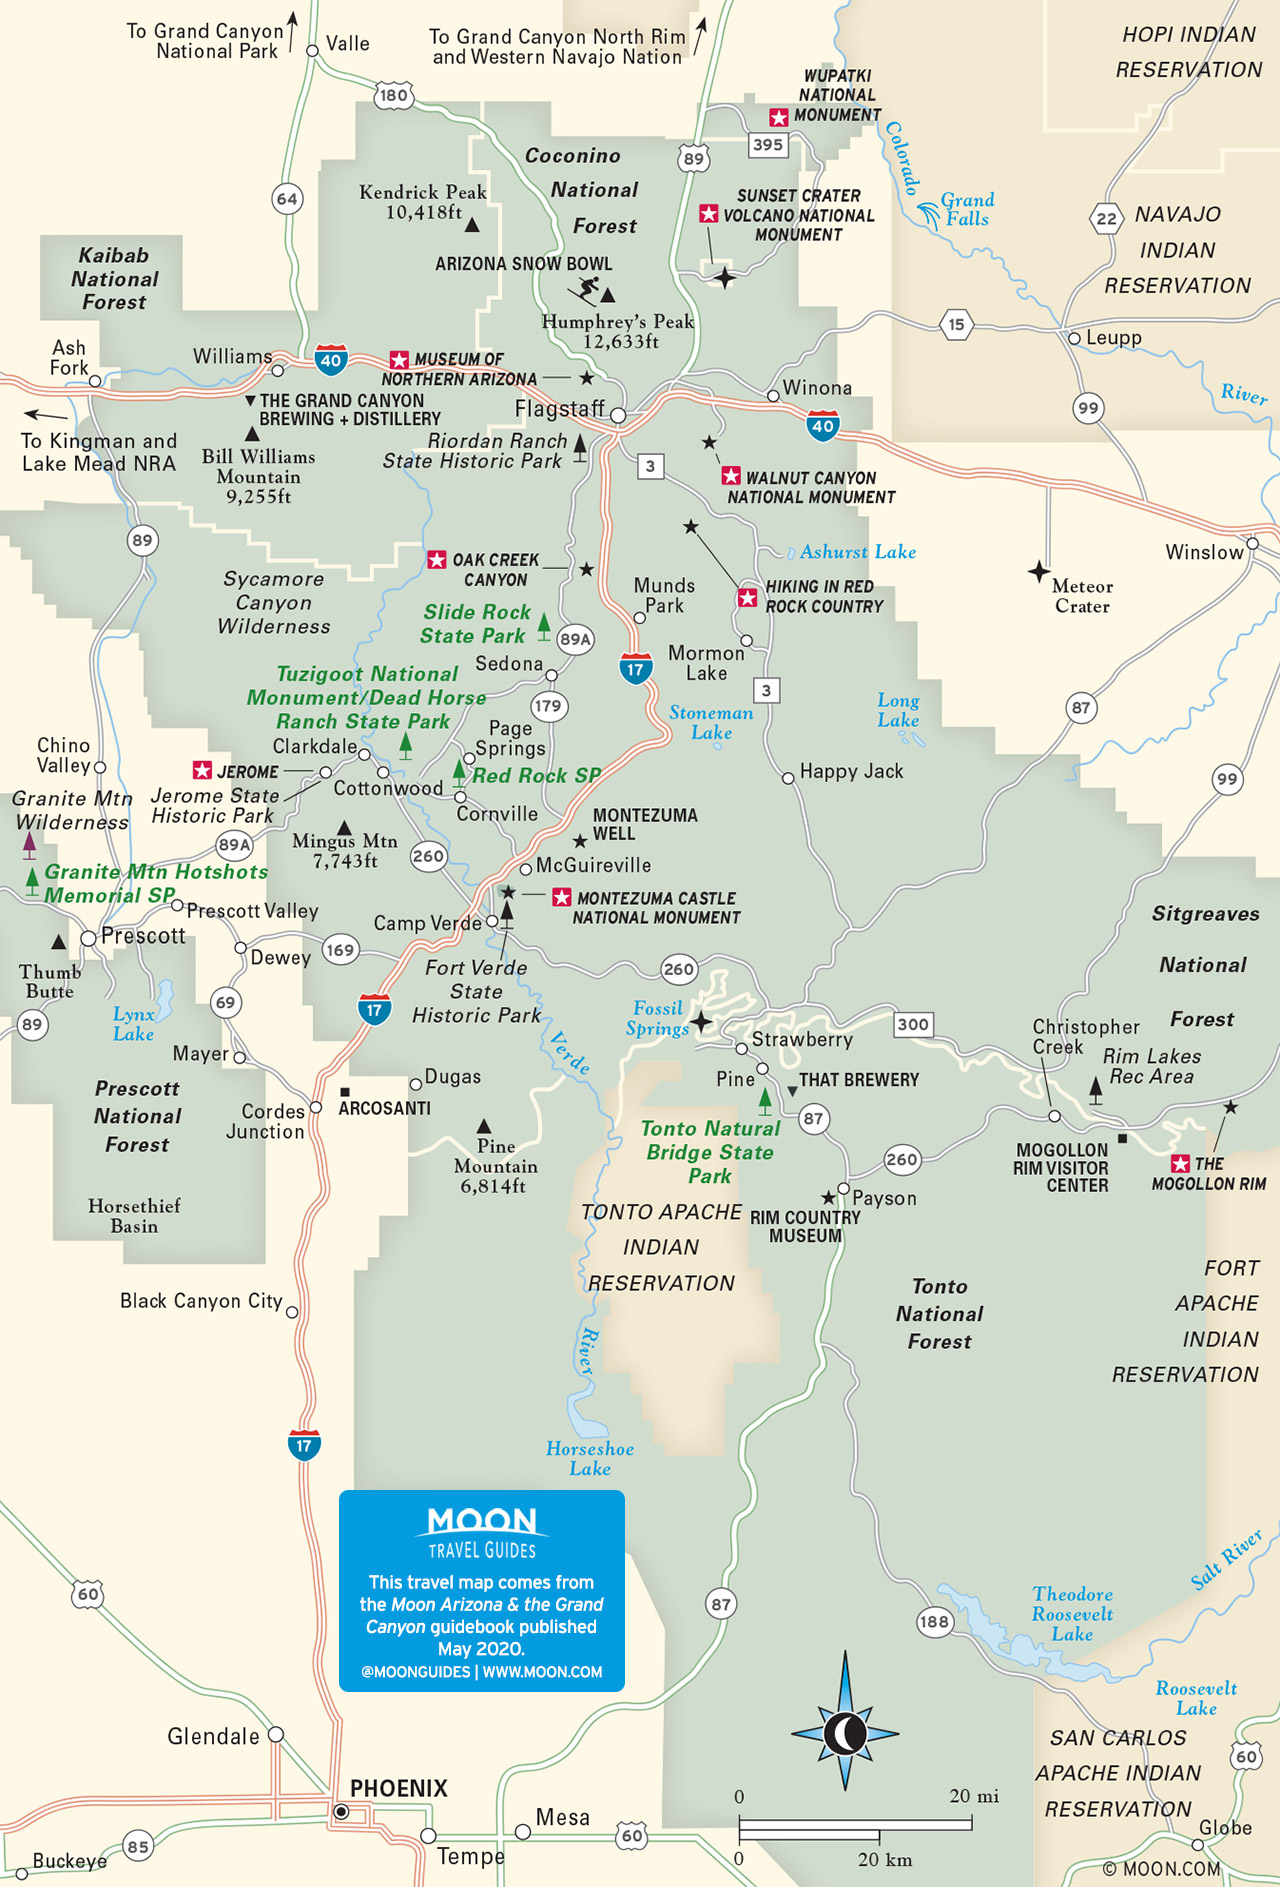 Travel map of Flagstaff and North-Central Arizona